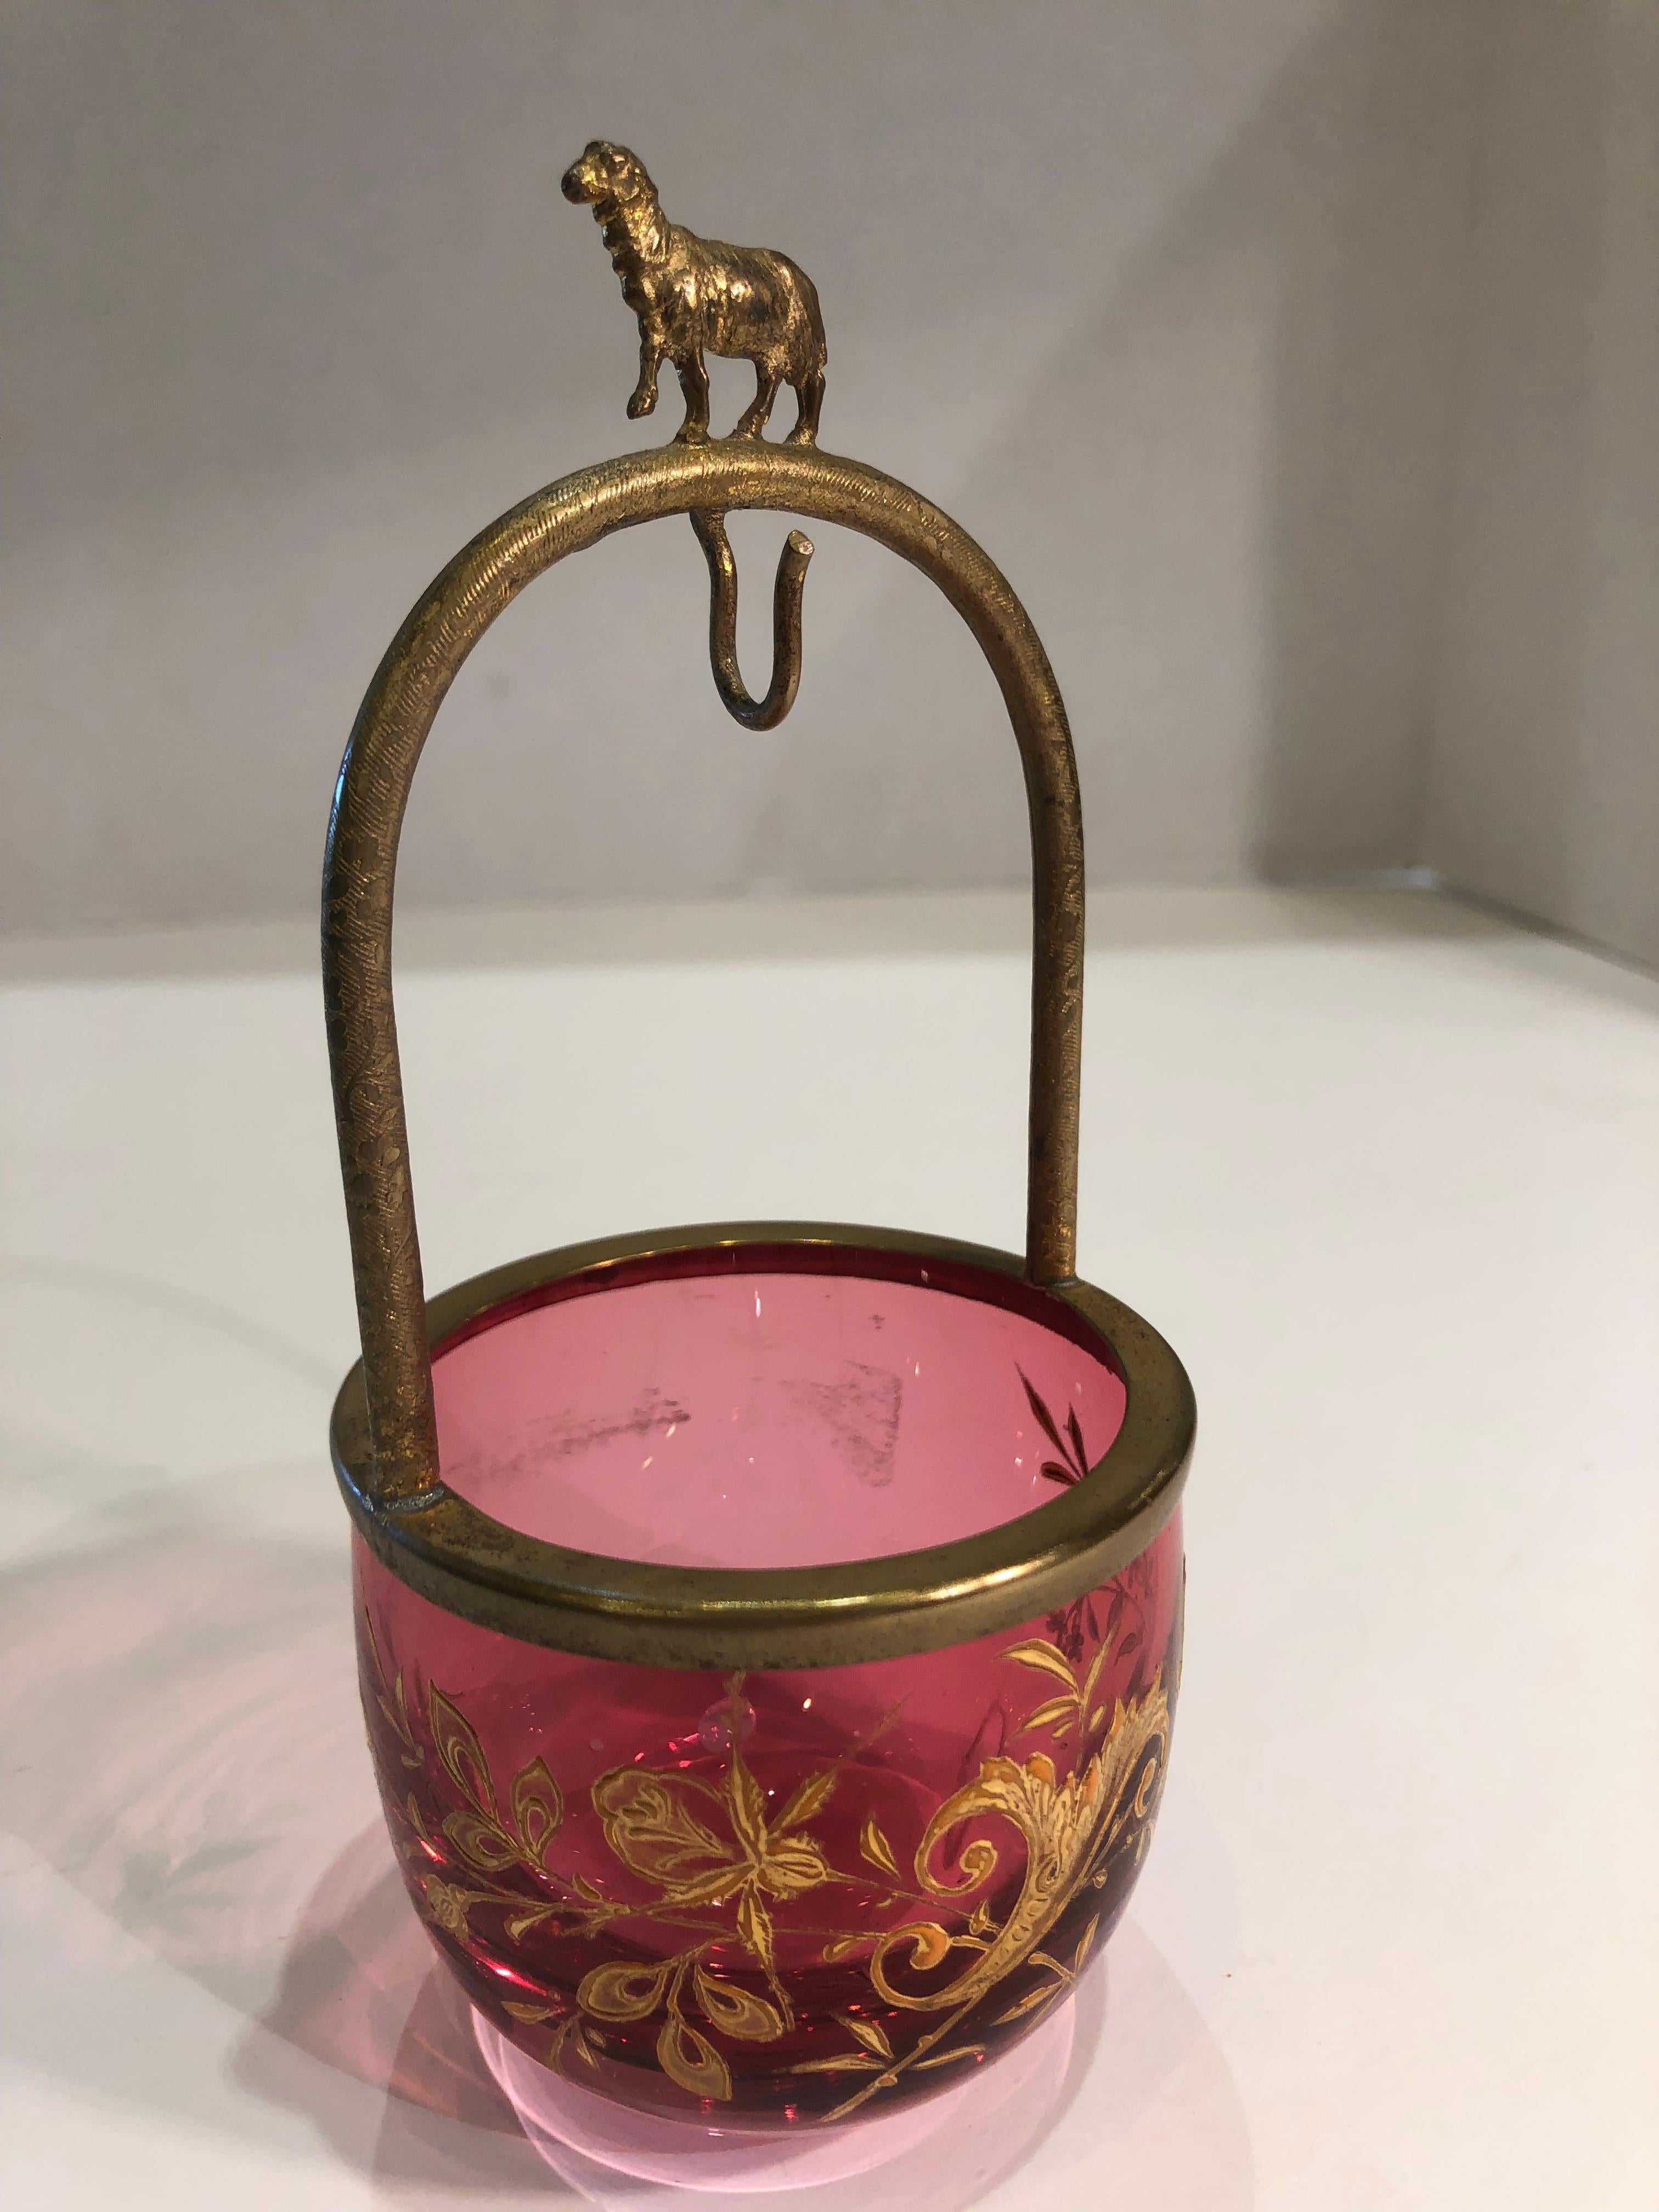 Beautifully handcrafted, arched display stand from which to hang a pocket watch features a gold metal frame and hook with an arch decorated with a whimsical sheep.  This frame is attached to a light cranberry colored glass multipurpose trinket dish,